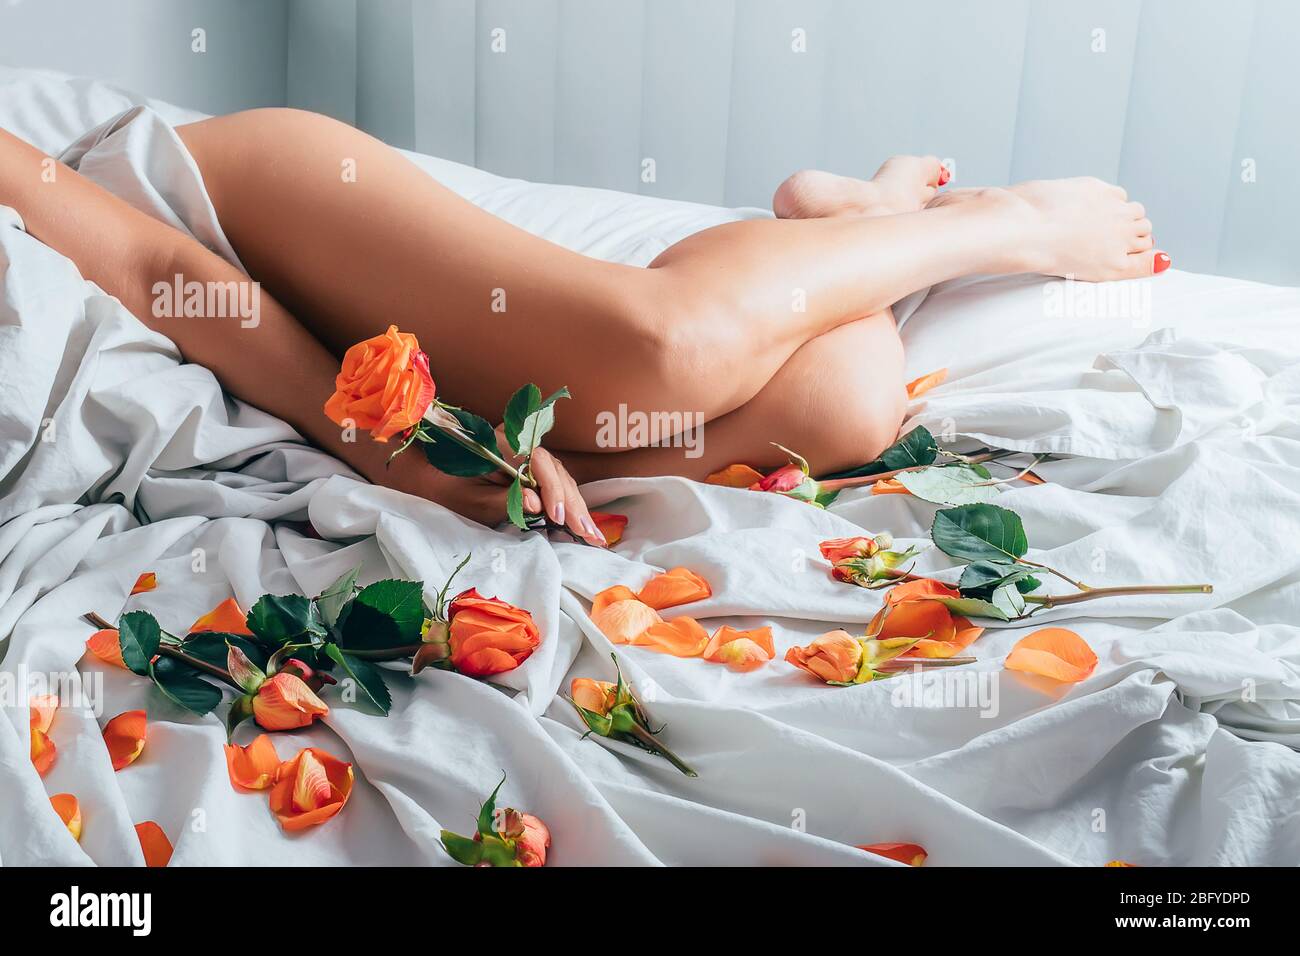 Cropped view of woman's legs lying on soft white bedding with orange red roses and petals. Stock Photo